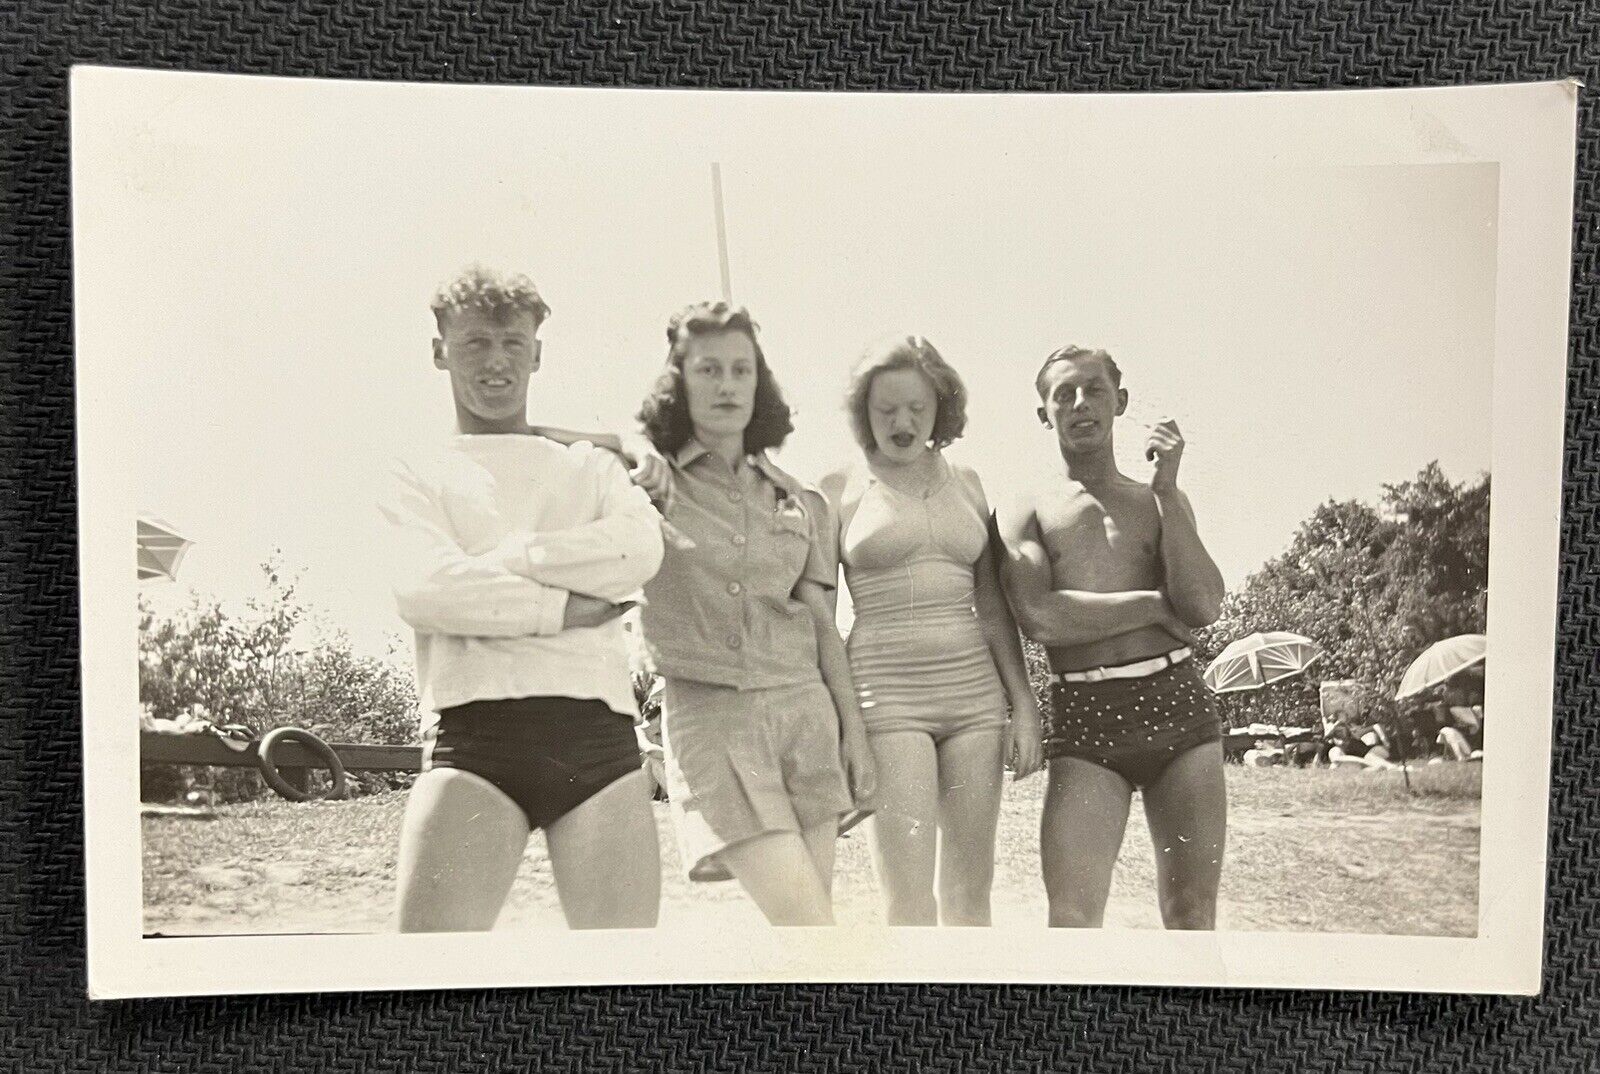 FOUND VINTAGE PHOTO PICTURE People In Swimsuits Posing For A Snapshot